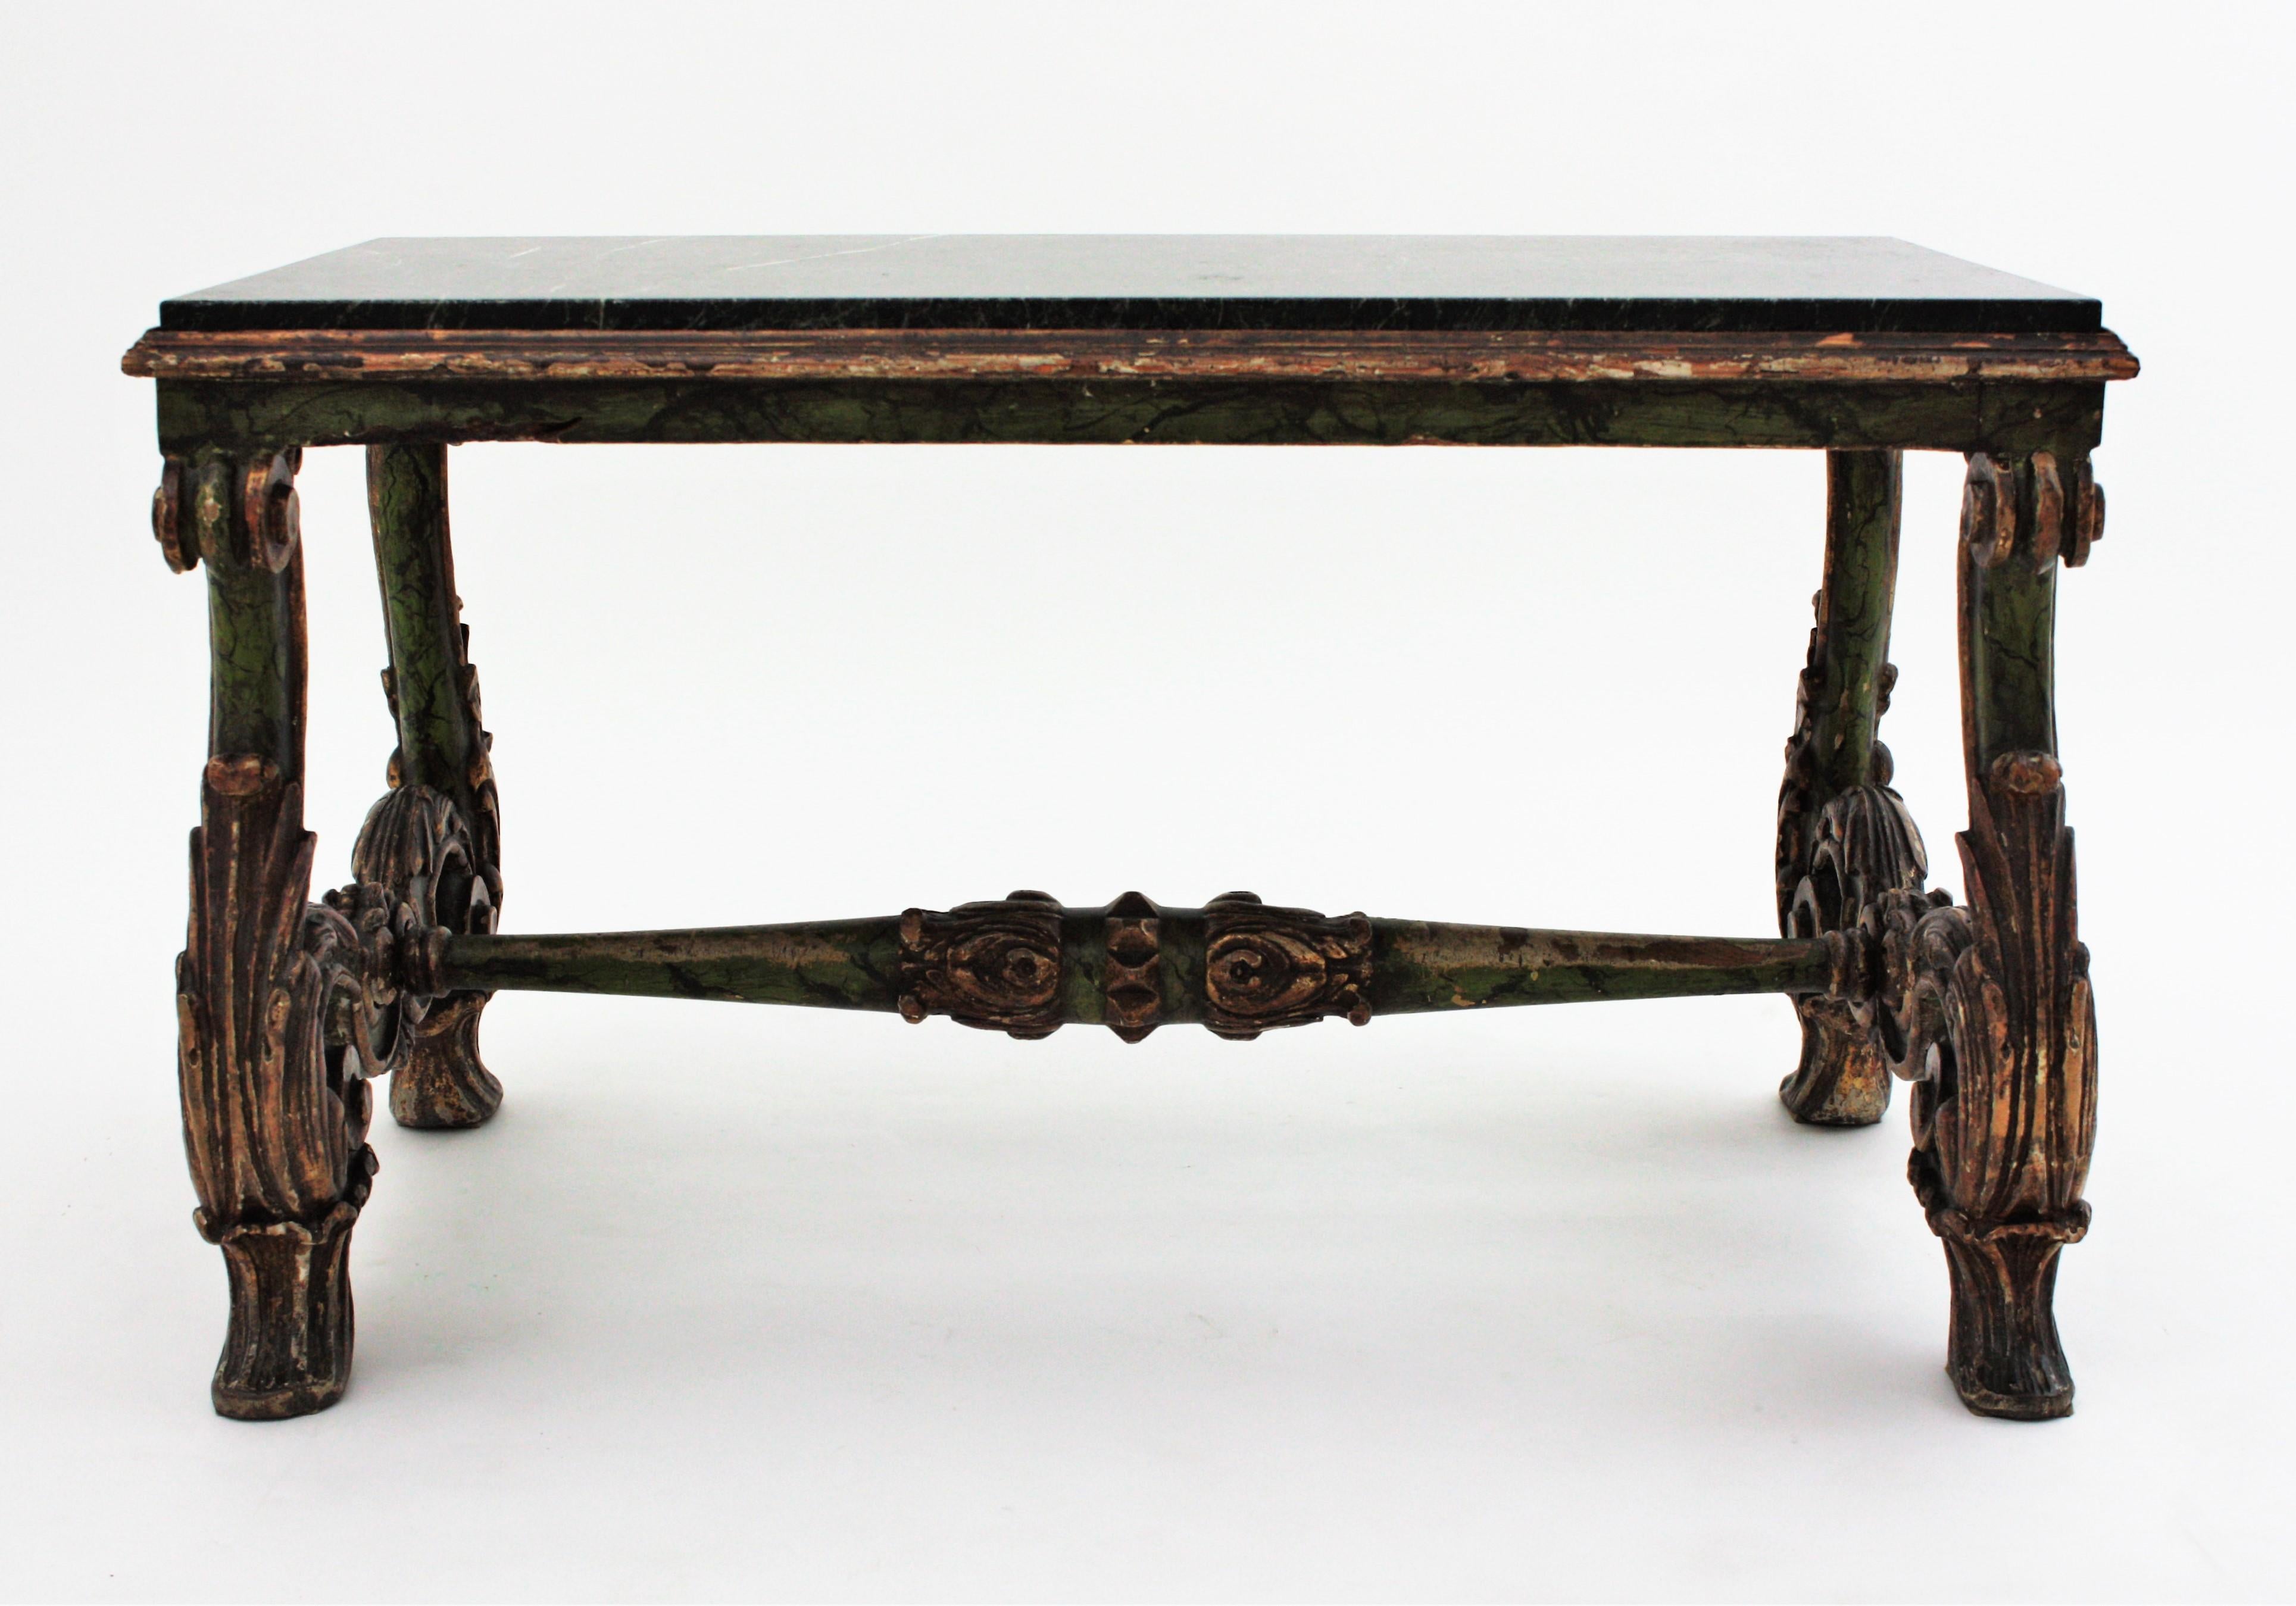 Spanish Baroque Carved Wood Coffee Table with Green Marble Top For Sale 9